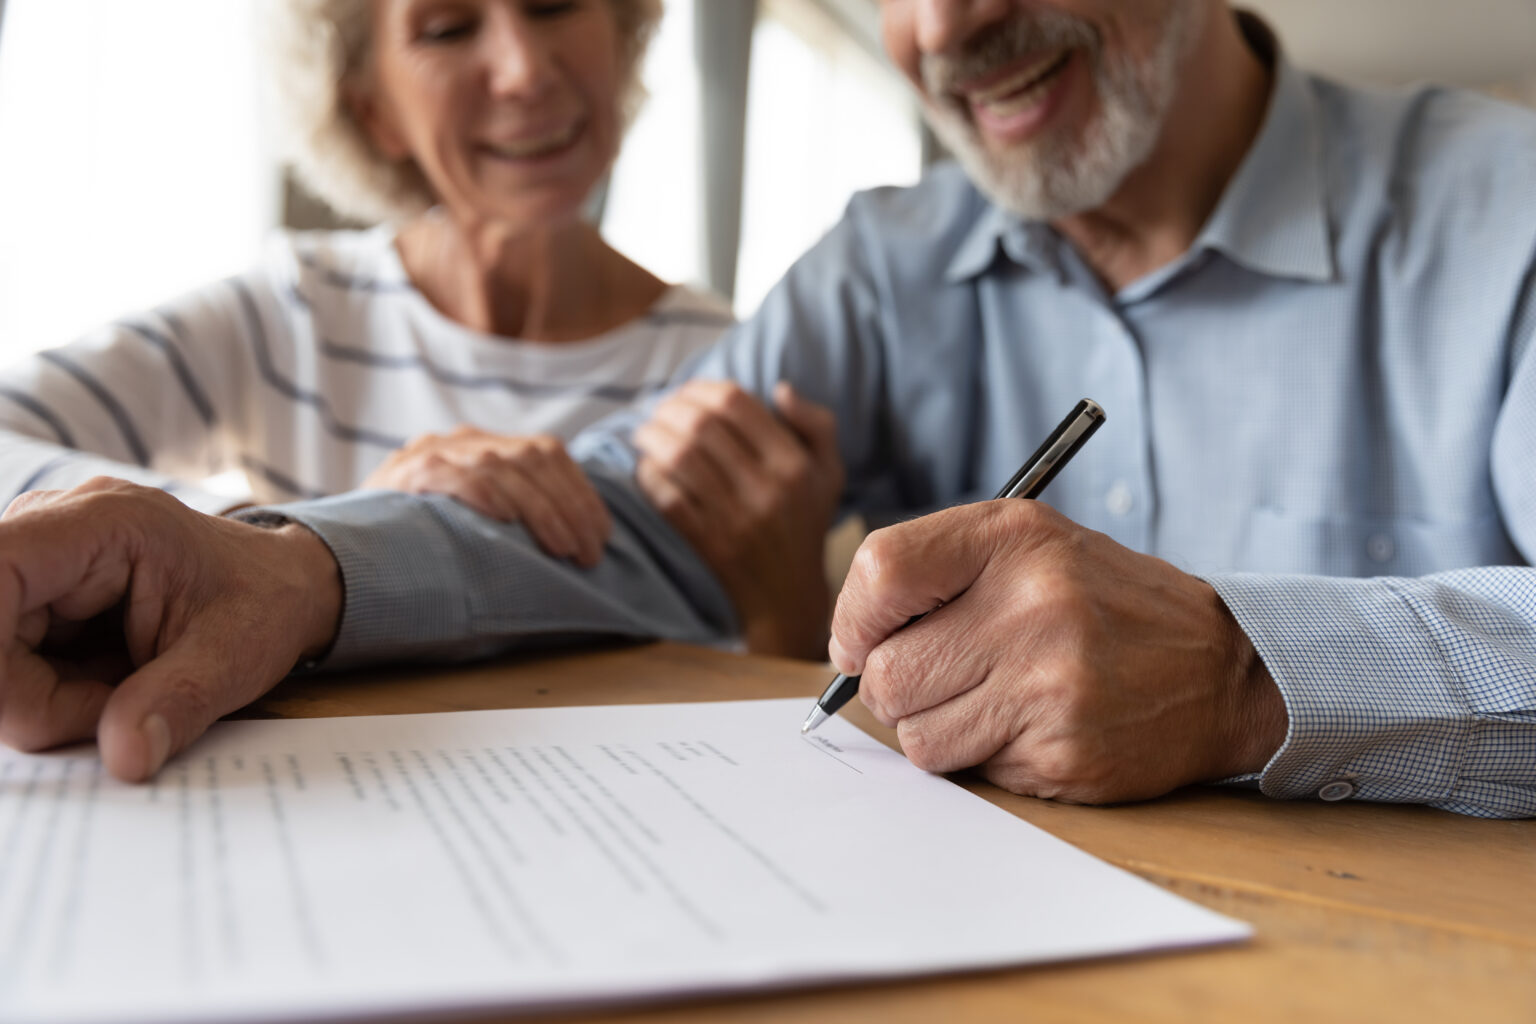 Zoomed-in image of elderly man and woman sitting together and signing a home inspection contract on paper, smiles on their faces.